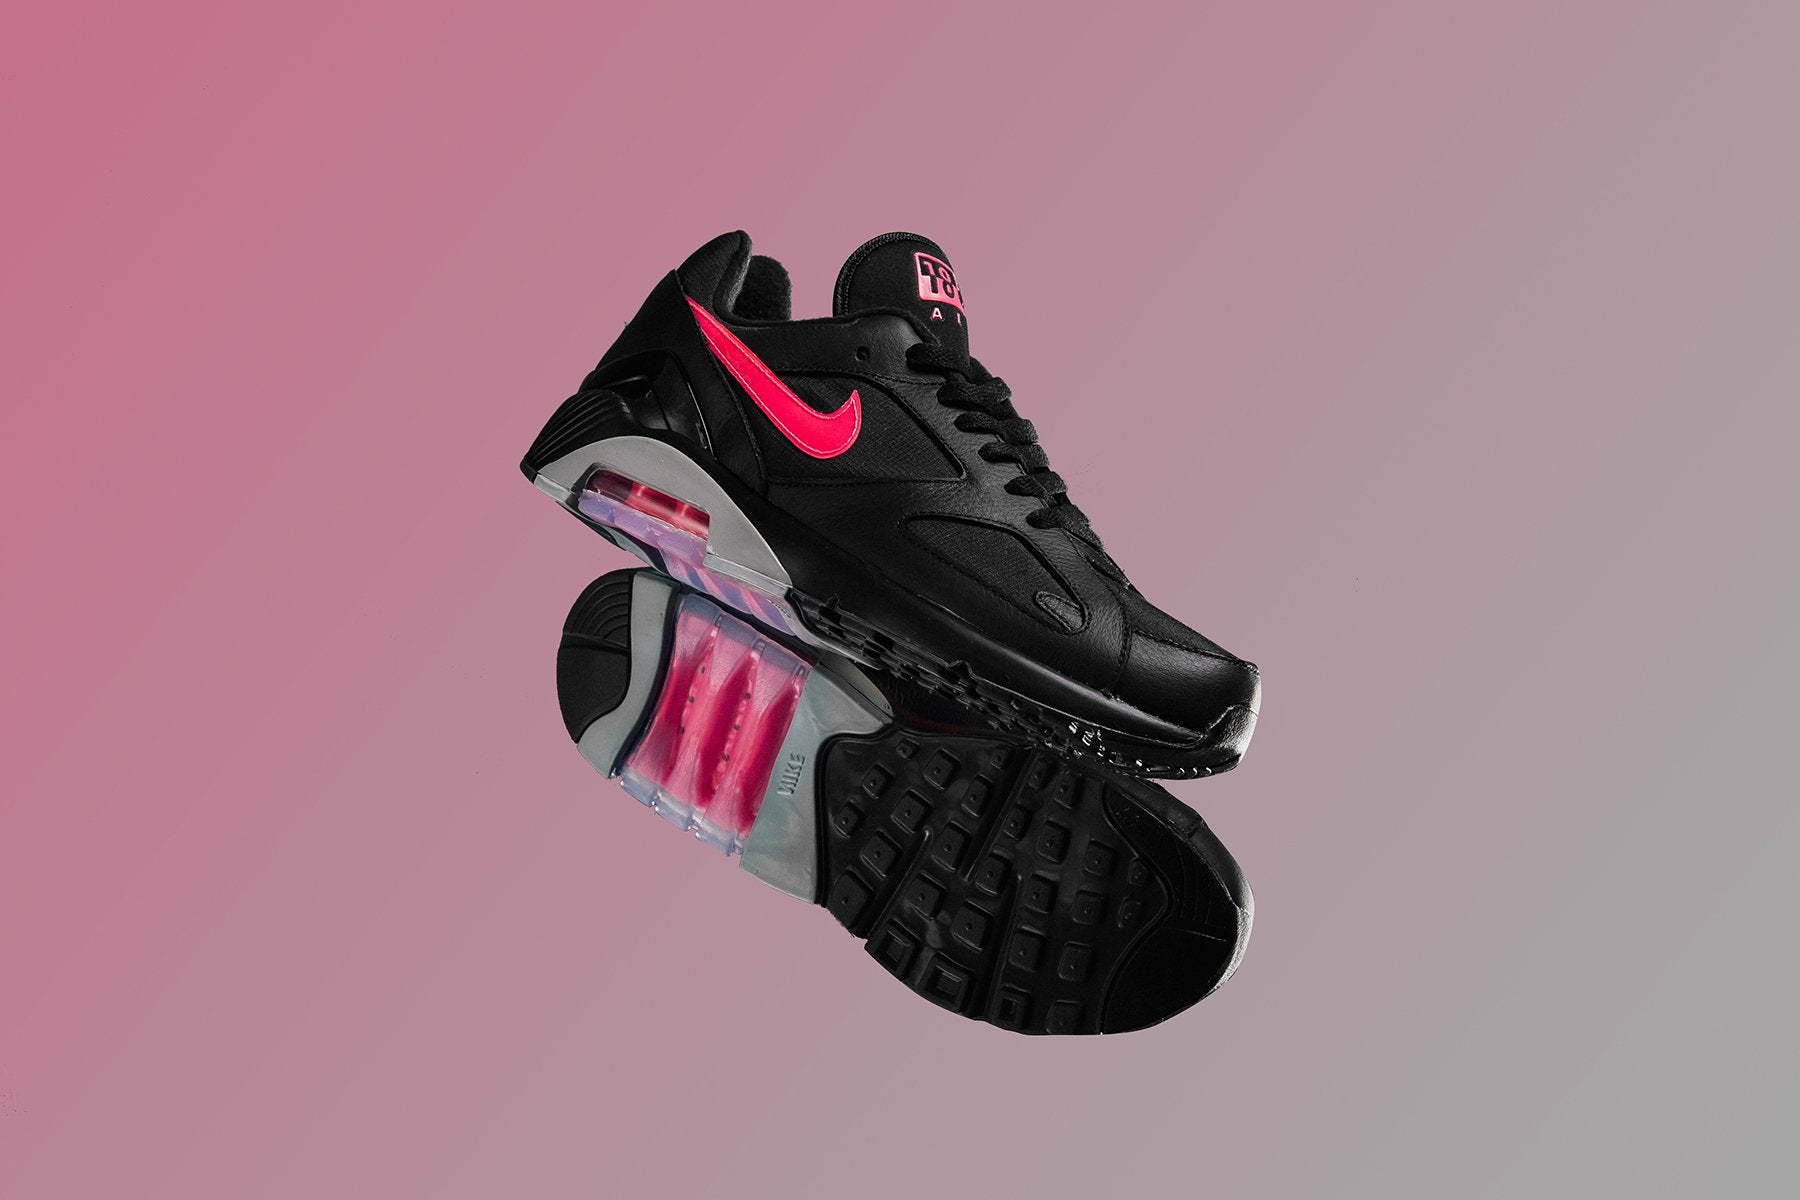 robo Brillante Larry Belmont Nike Air Max 180 "Black/Pink Blast" Available Now – Feature